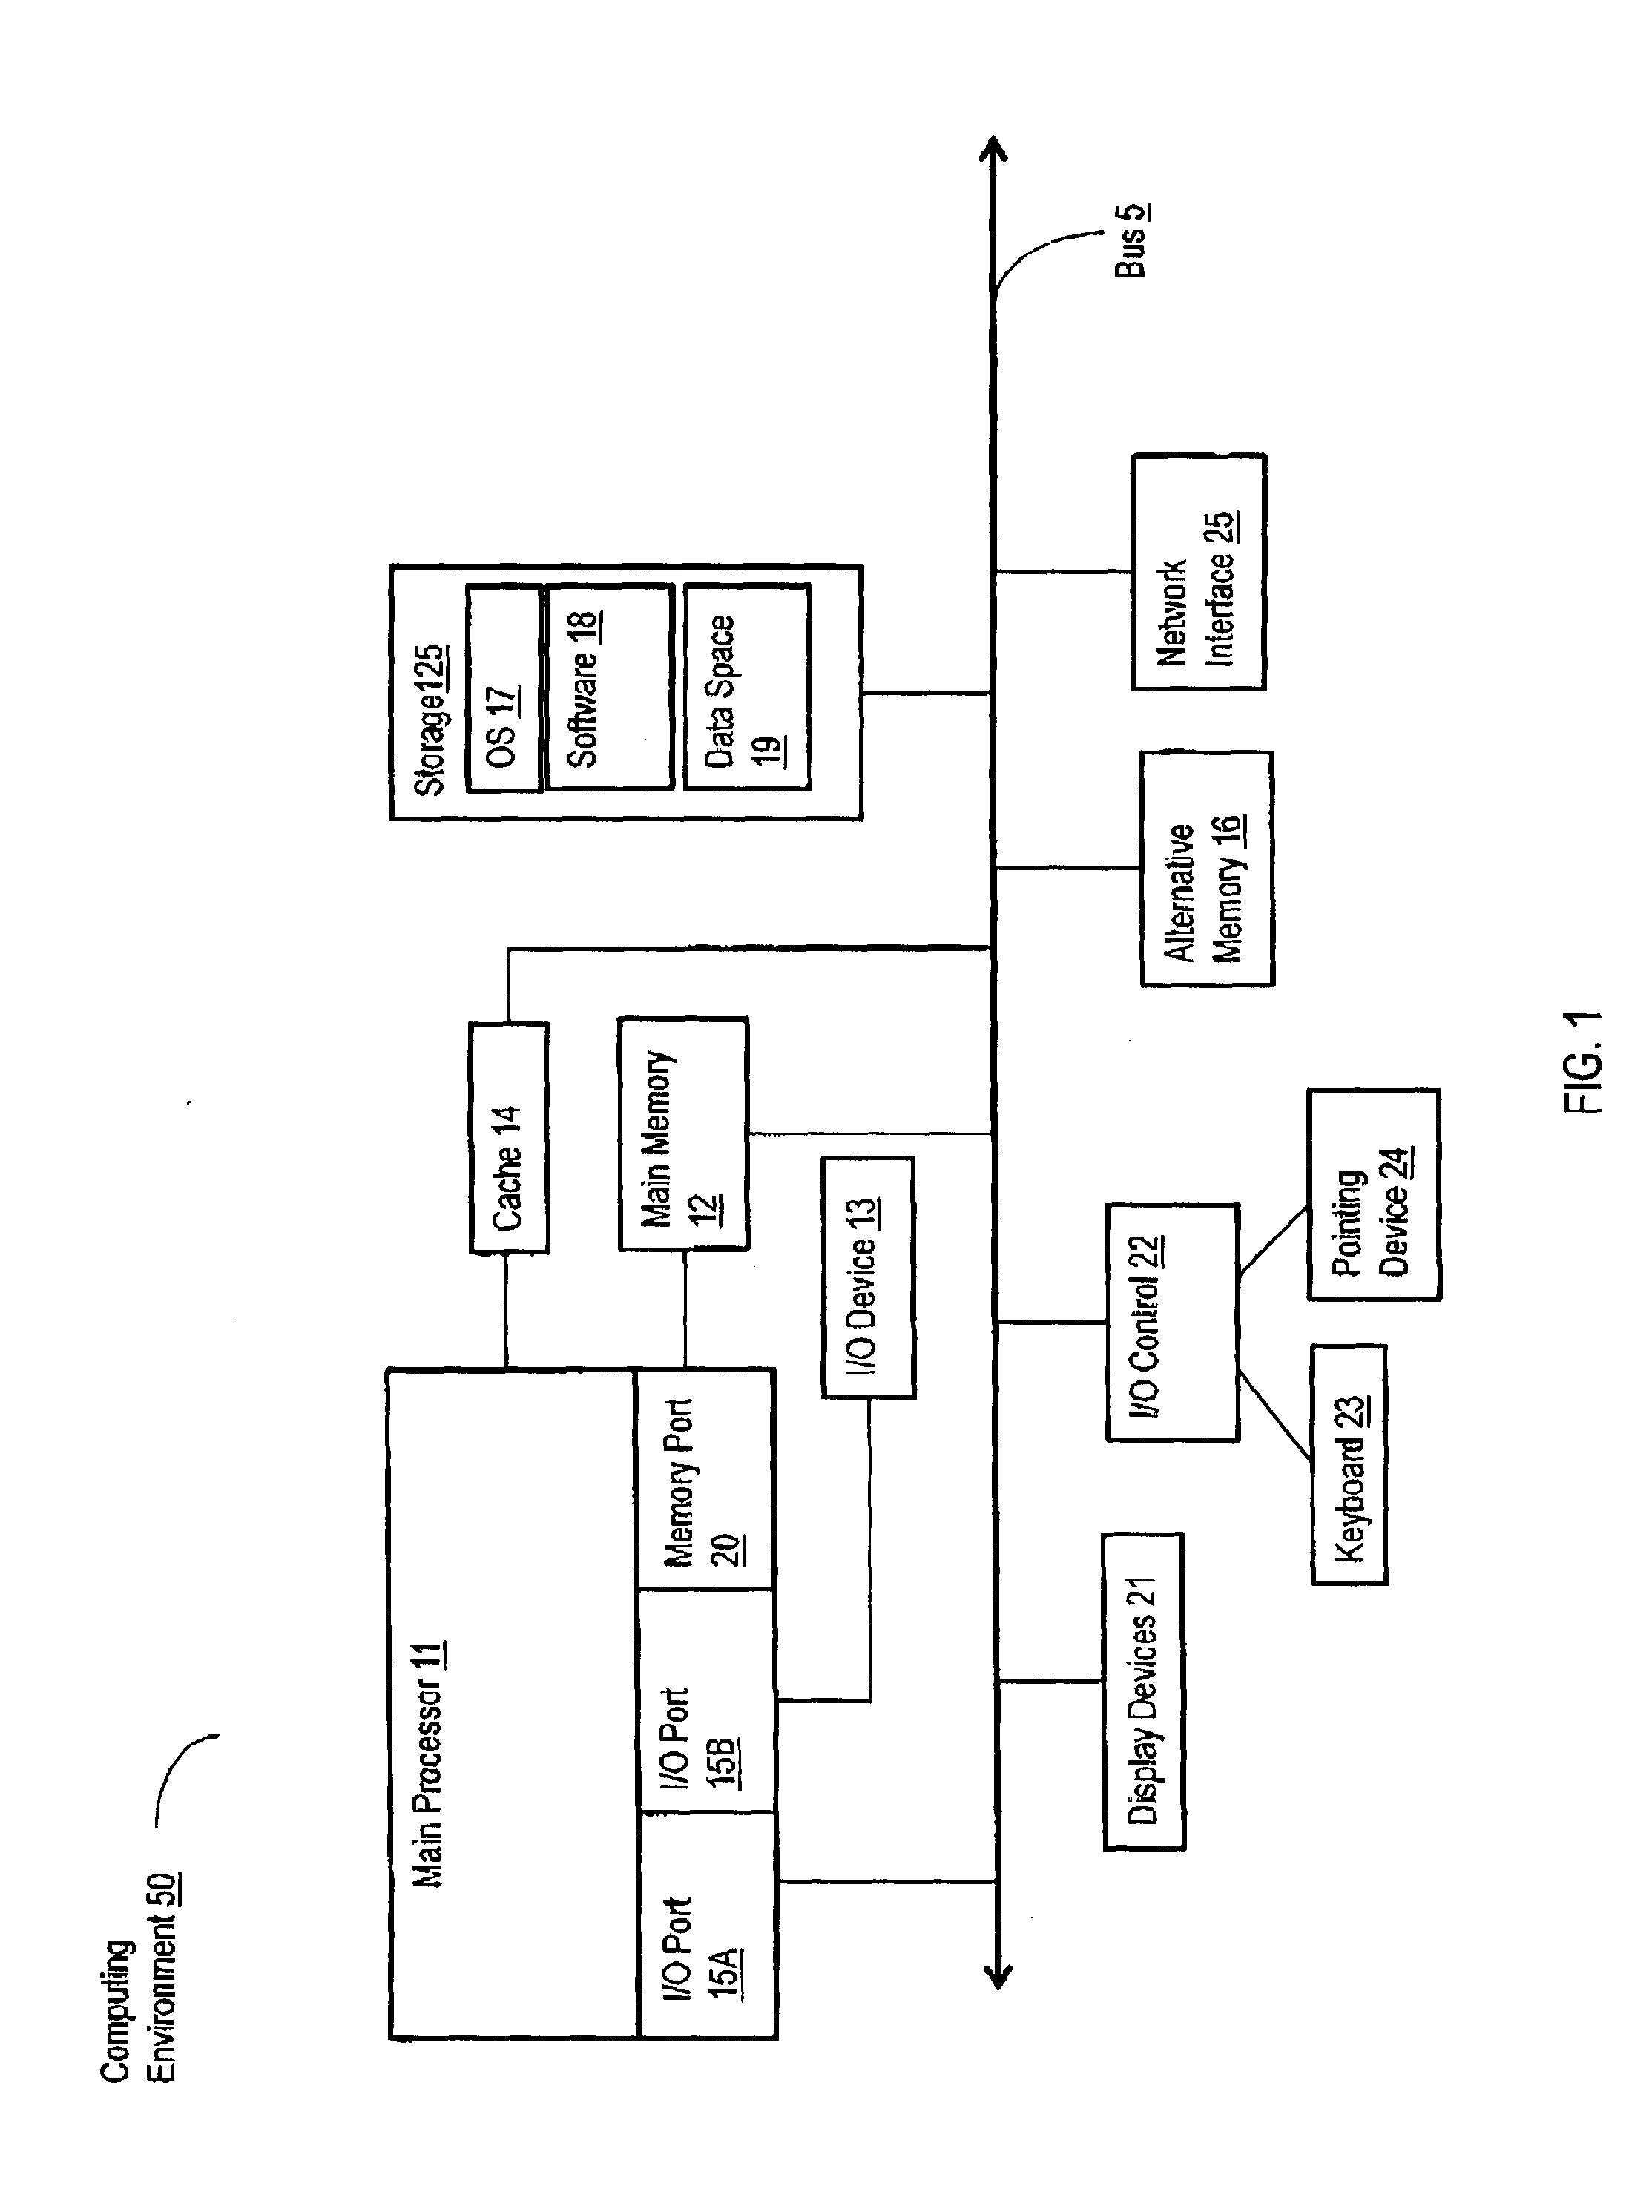 Systems and methods of detecting body movements using globally generated multi-dimensional gesture data